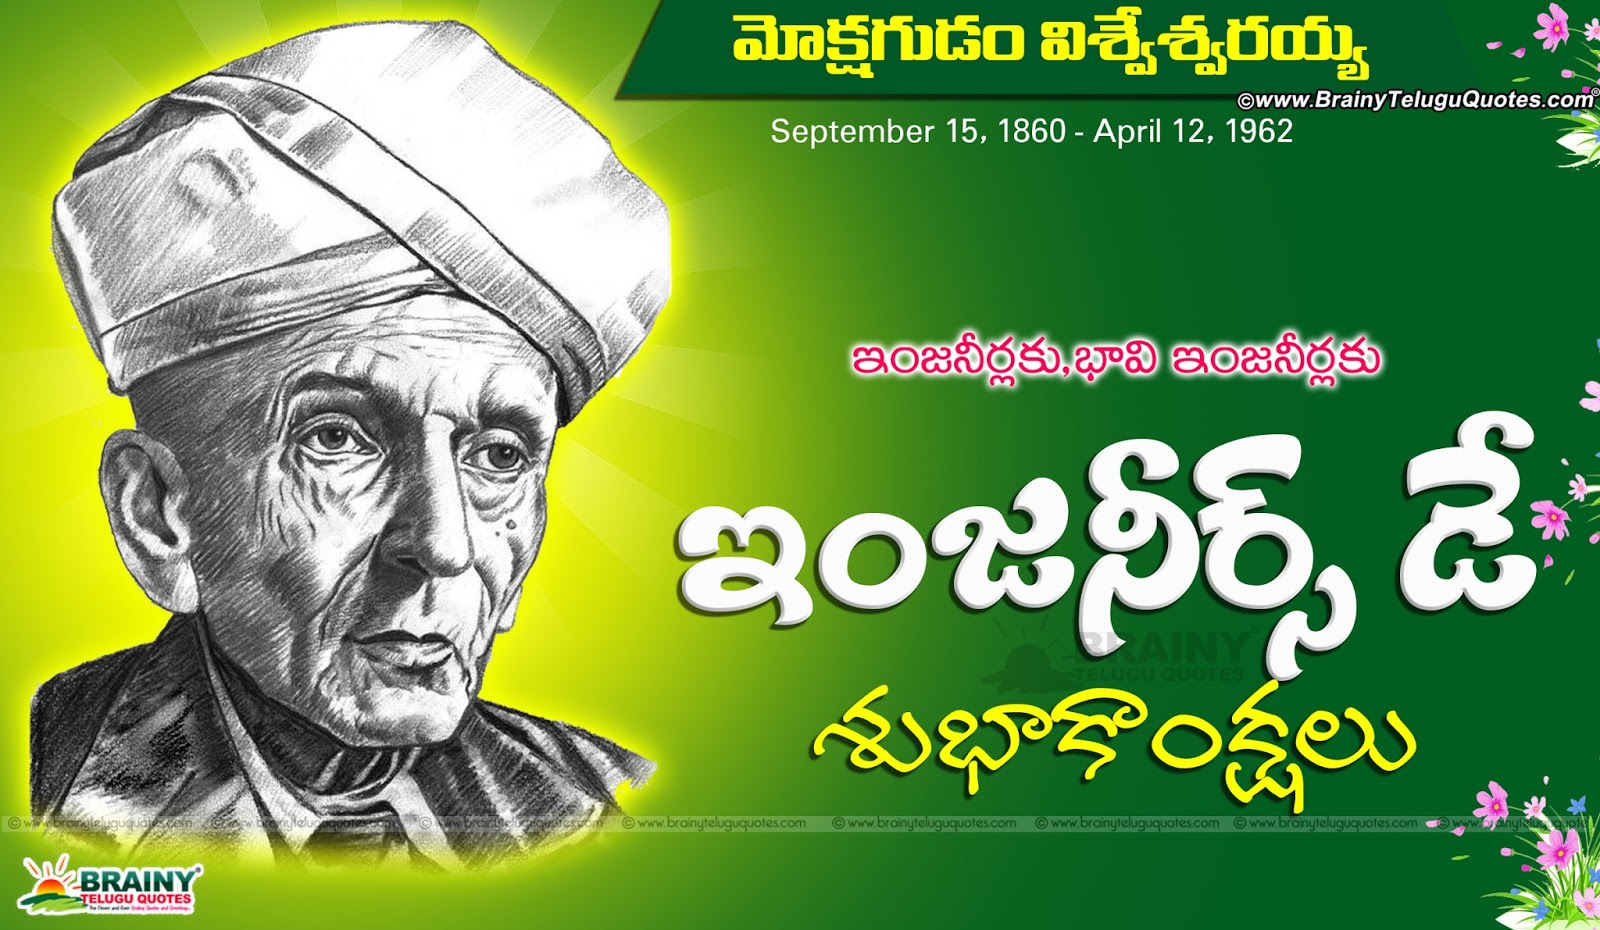 Happy Engineers Day Telugu Greetings Messages Quotes Wallpapers